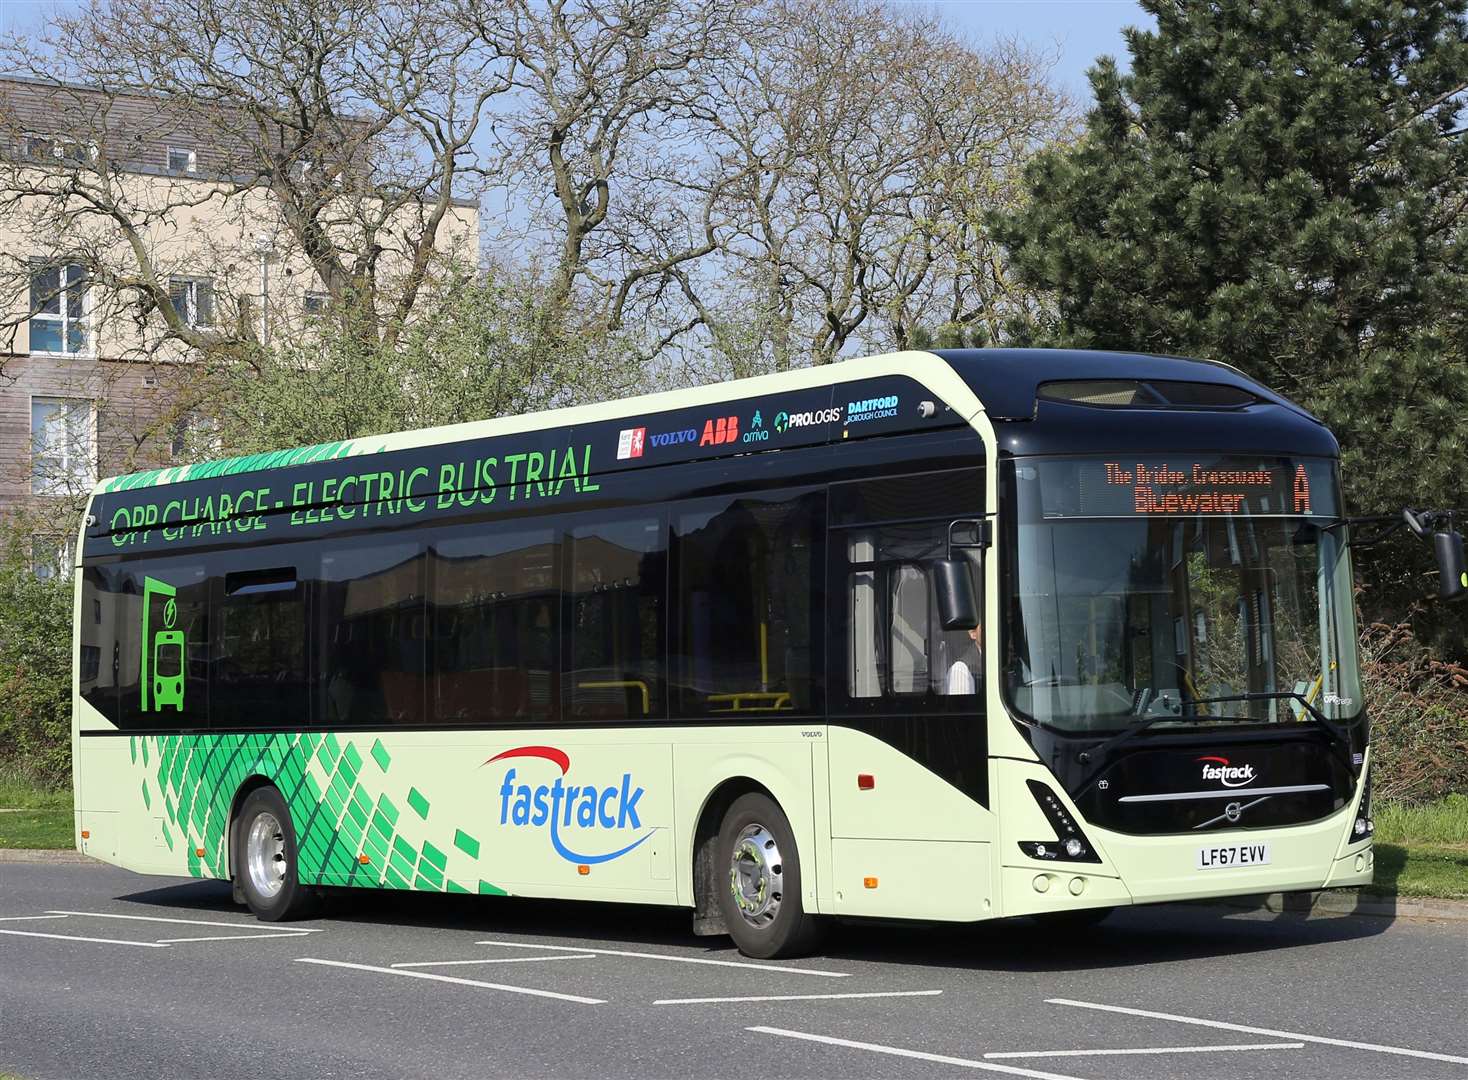 An electric bus trialled in Dartford, where the first Fastrack service began. Library picture: Kent County Council